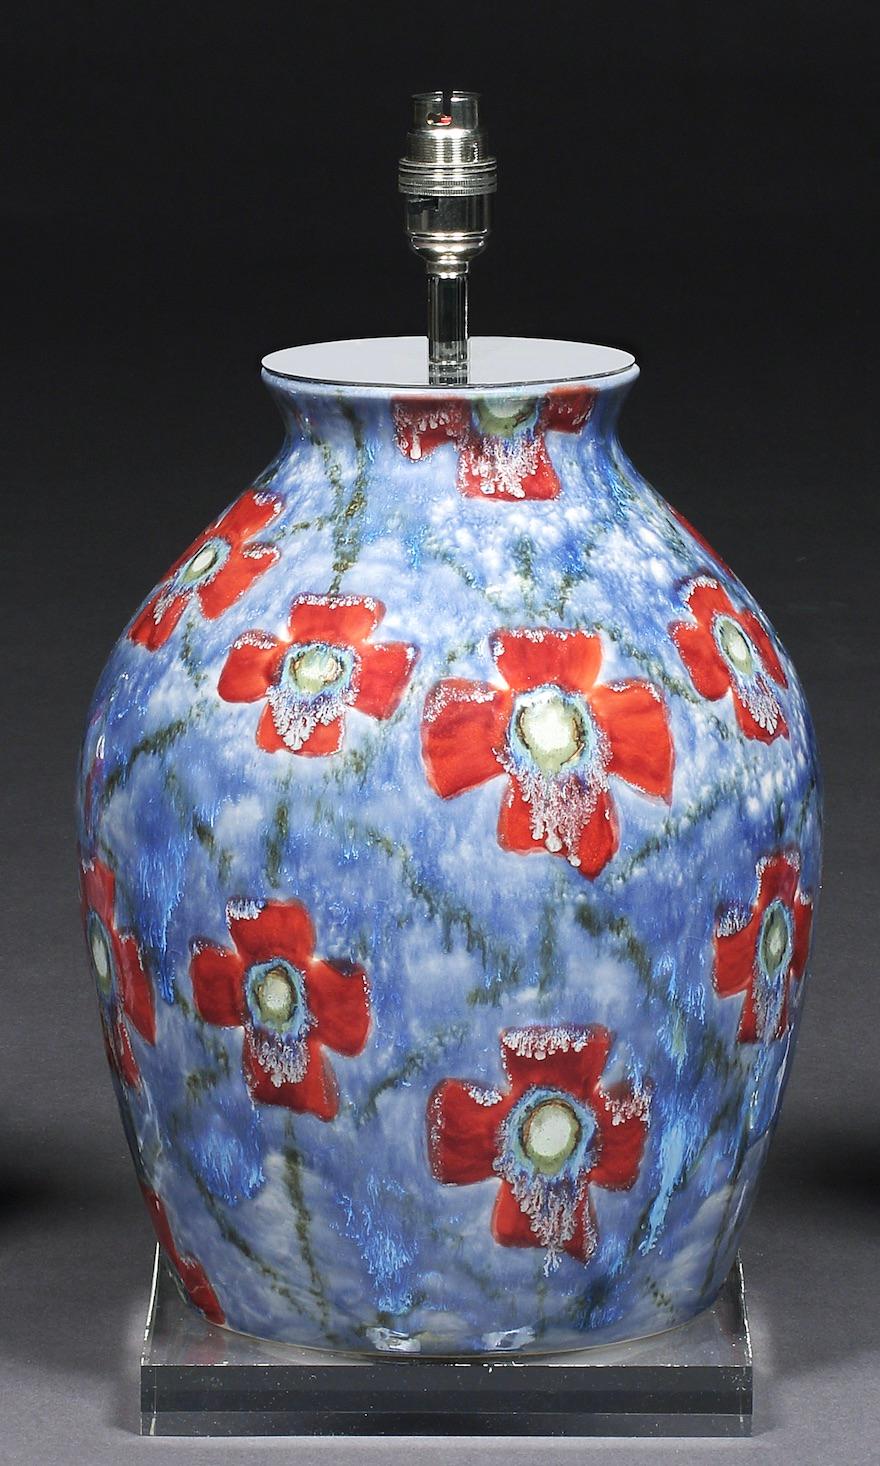 A large Cobridge, poppy and ice pattern, hand painted vase converted into a table lamp on a perspex base, 12” high
One of Cobridge Pottery’s most popular patterns, designed by artist Anita Harris, leading designer at Cobridge, Moorcroft & her own